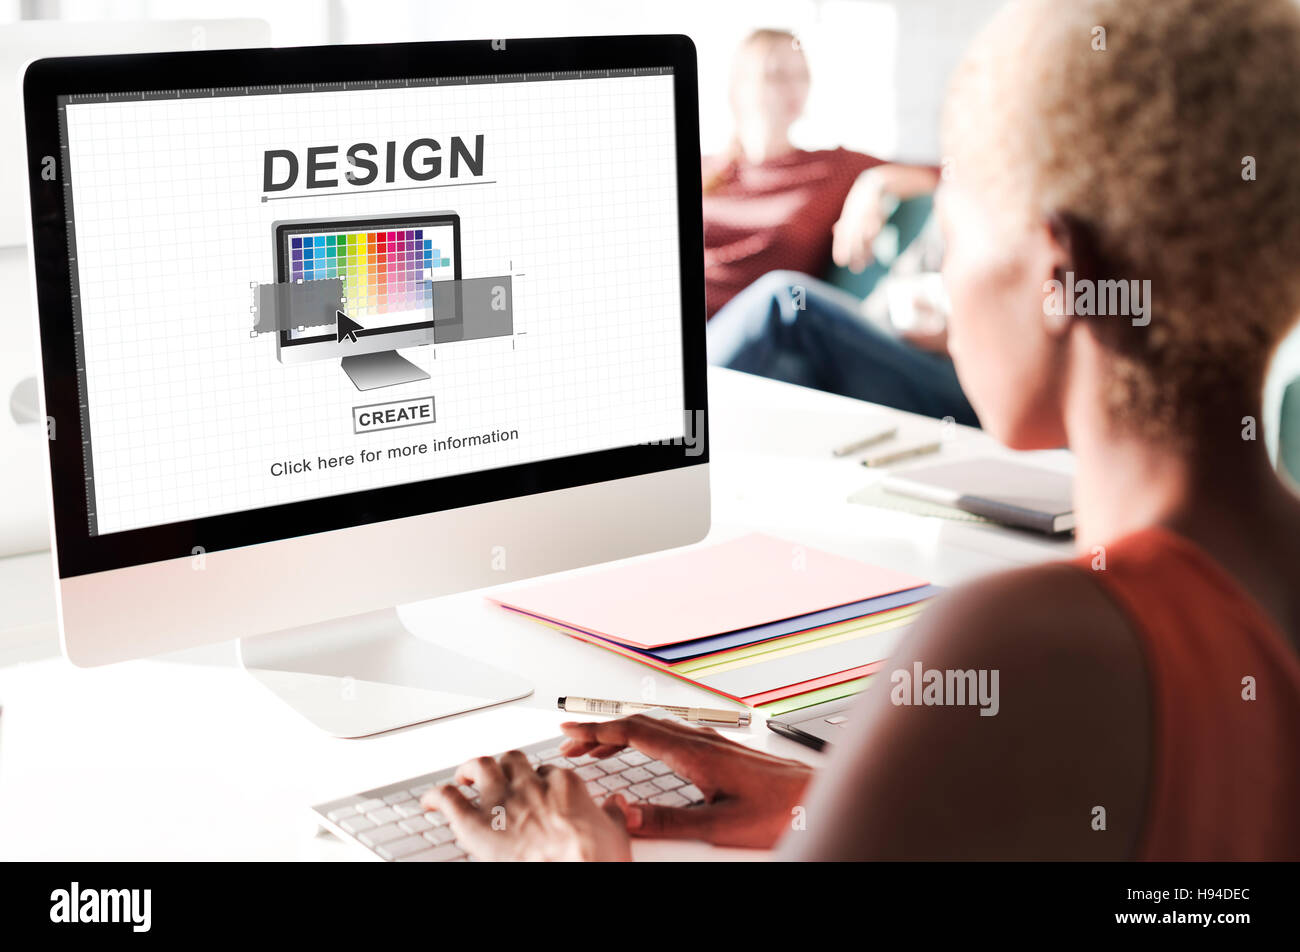 Design Layout Computer Software Interface Concept Stock Photo